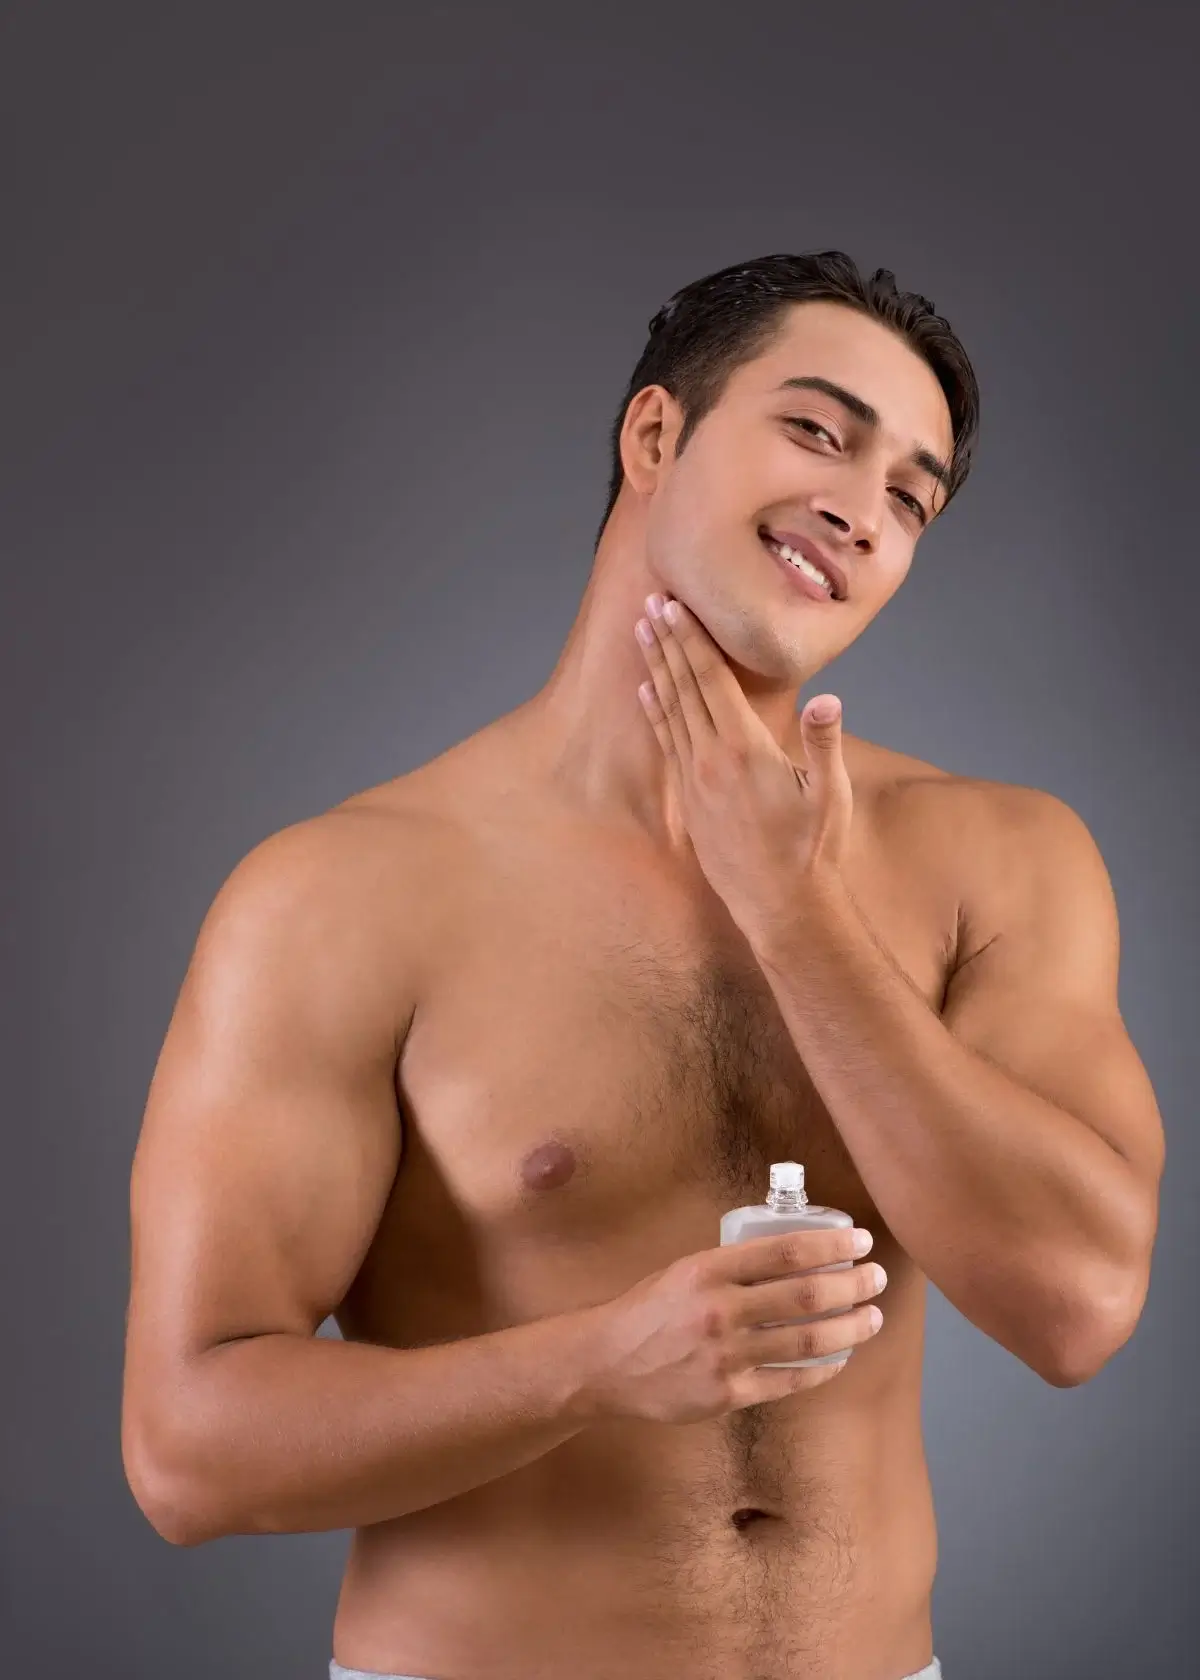 How to Make All-Natural Face Moisturizer for Men?